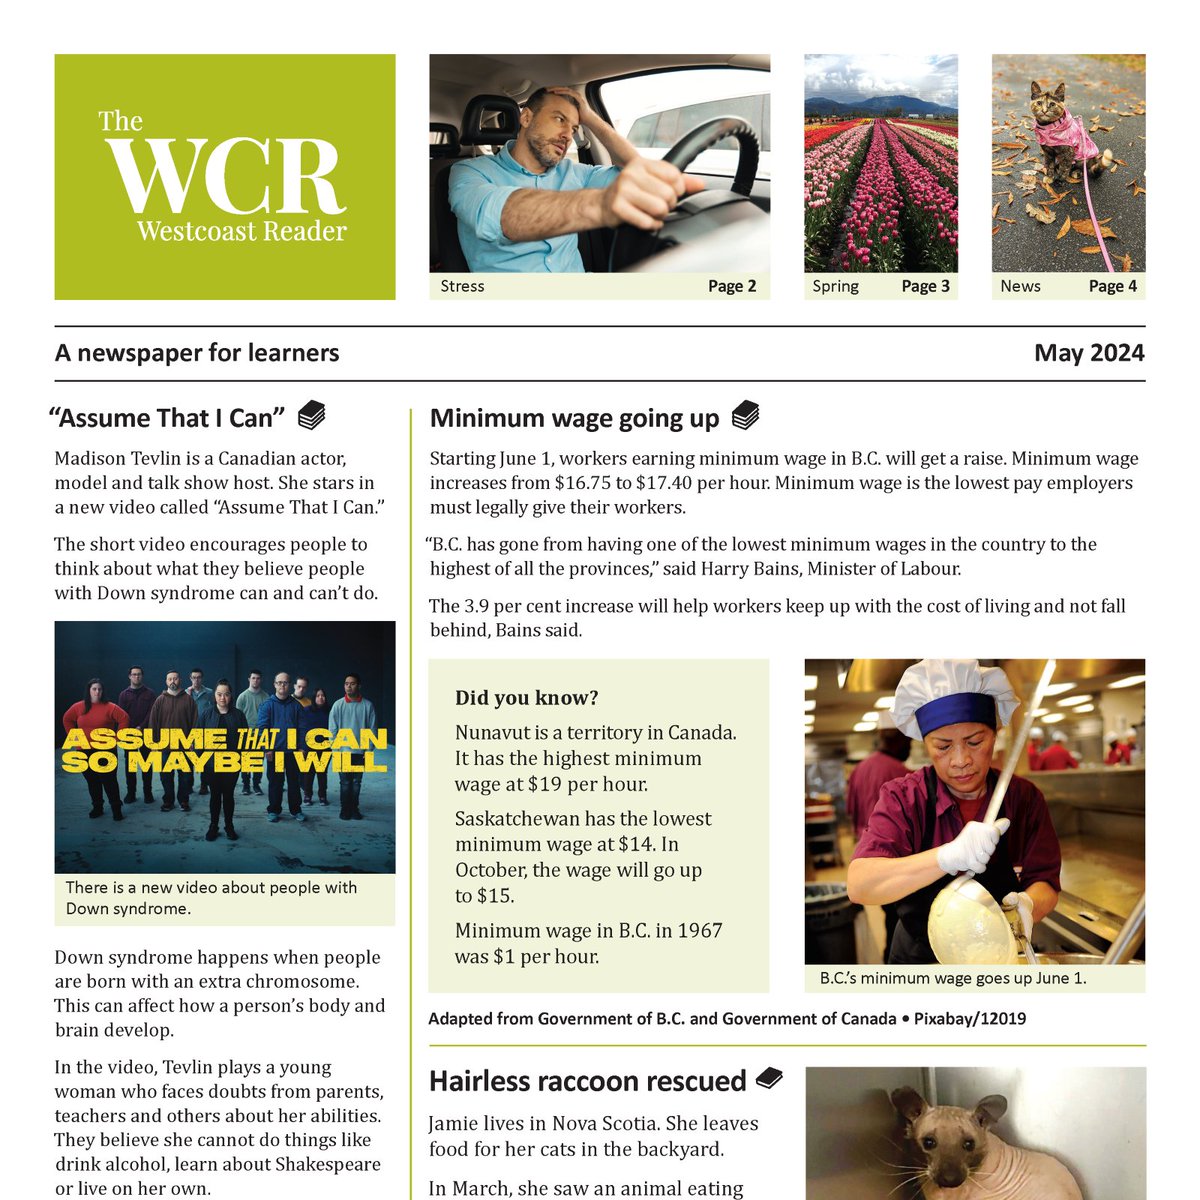 📰🏒🏋️‍♂️🐱🦝 The May issue of The WCR has new stories at three reading levels!
👉 Subscribe the monthly newspaper for learners, digital and/or print edition, and download the free Teachers’ Notes at: thewestcoastreader.com
#Newspaper #AdultLiteracy #AdultEducation #TeacherResource